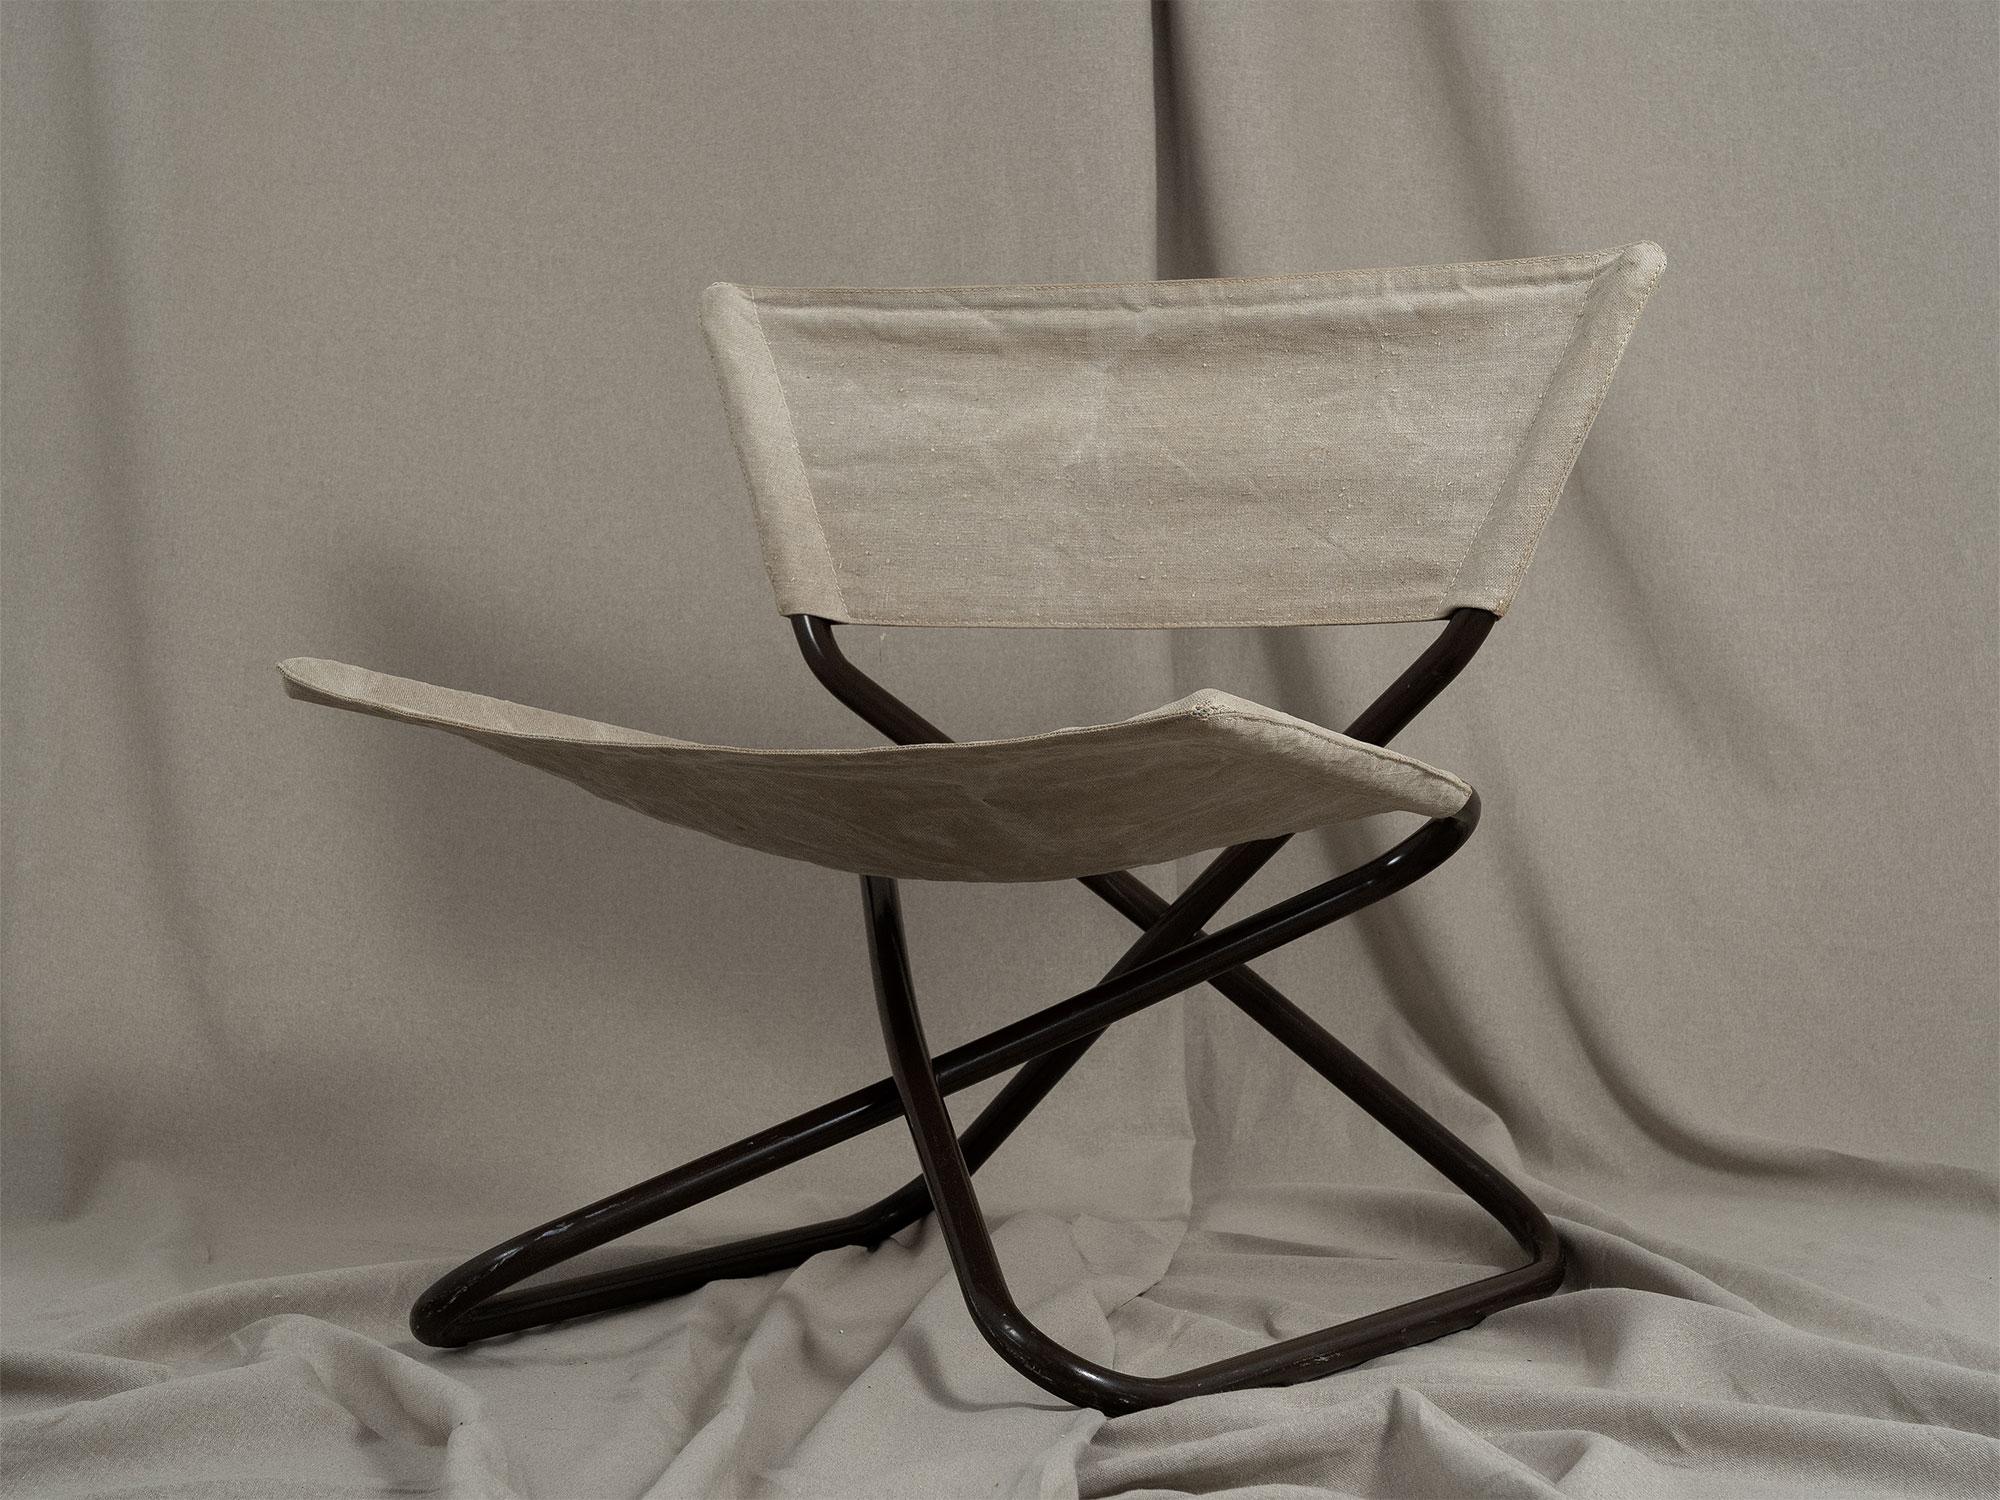 Z-Down folding chair by Erik Magnussen, produced by Torben Ørskov in Denmark in 1968. Dark brown lacquered metal tube frame with the original natural linen canvas slip-on seat. There are a couple of worn spots on the frame and canvas.